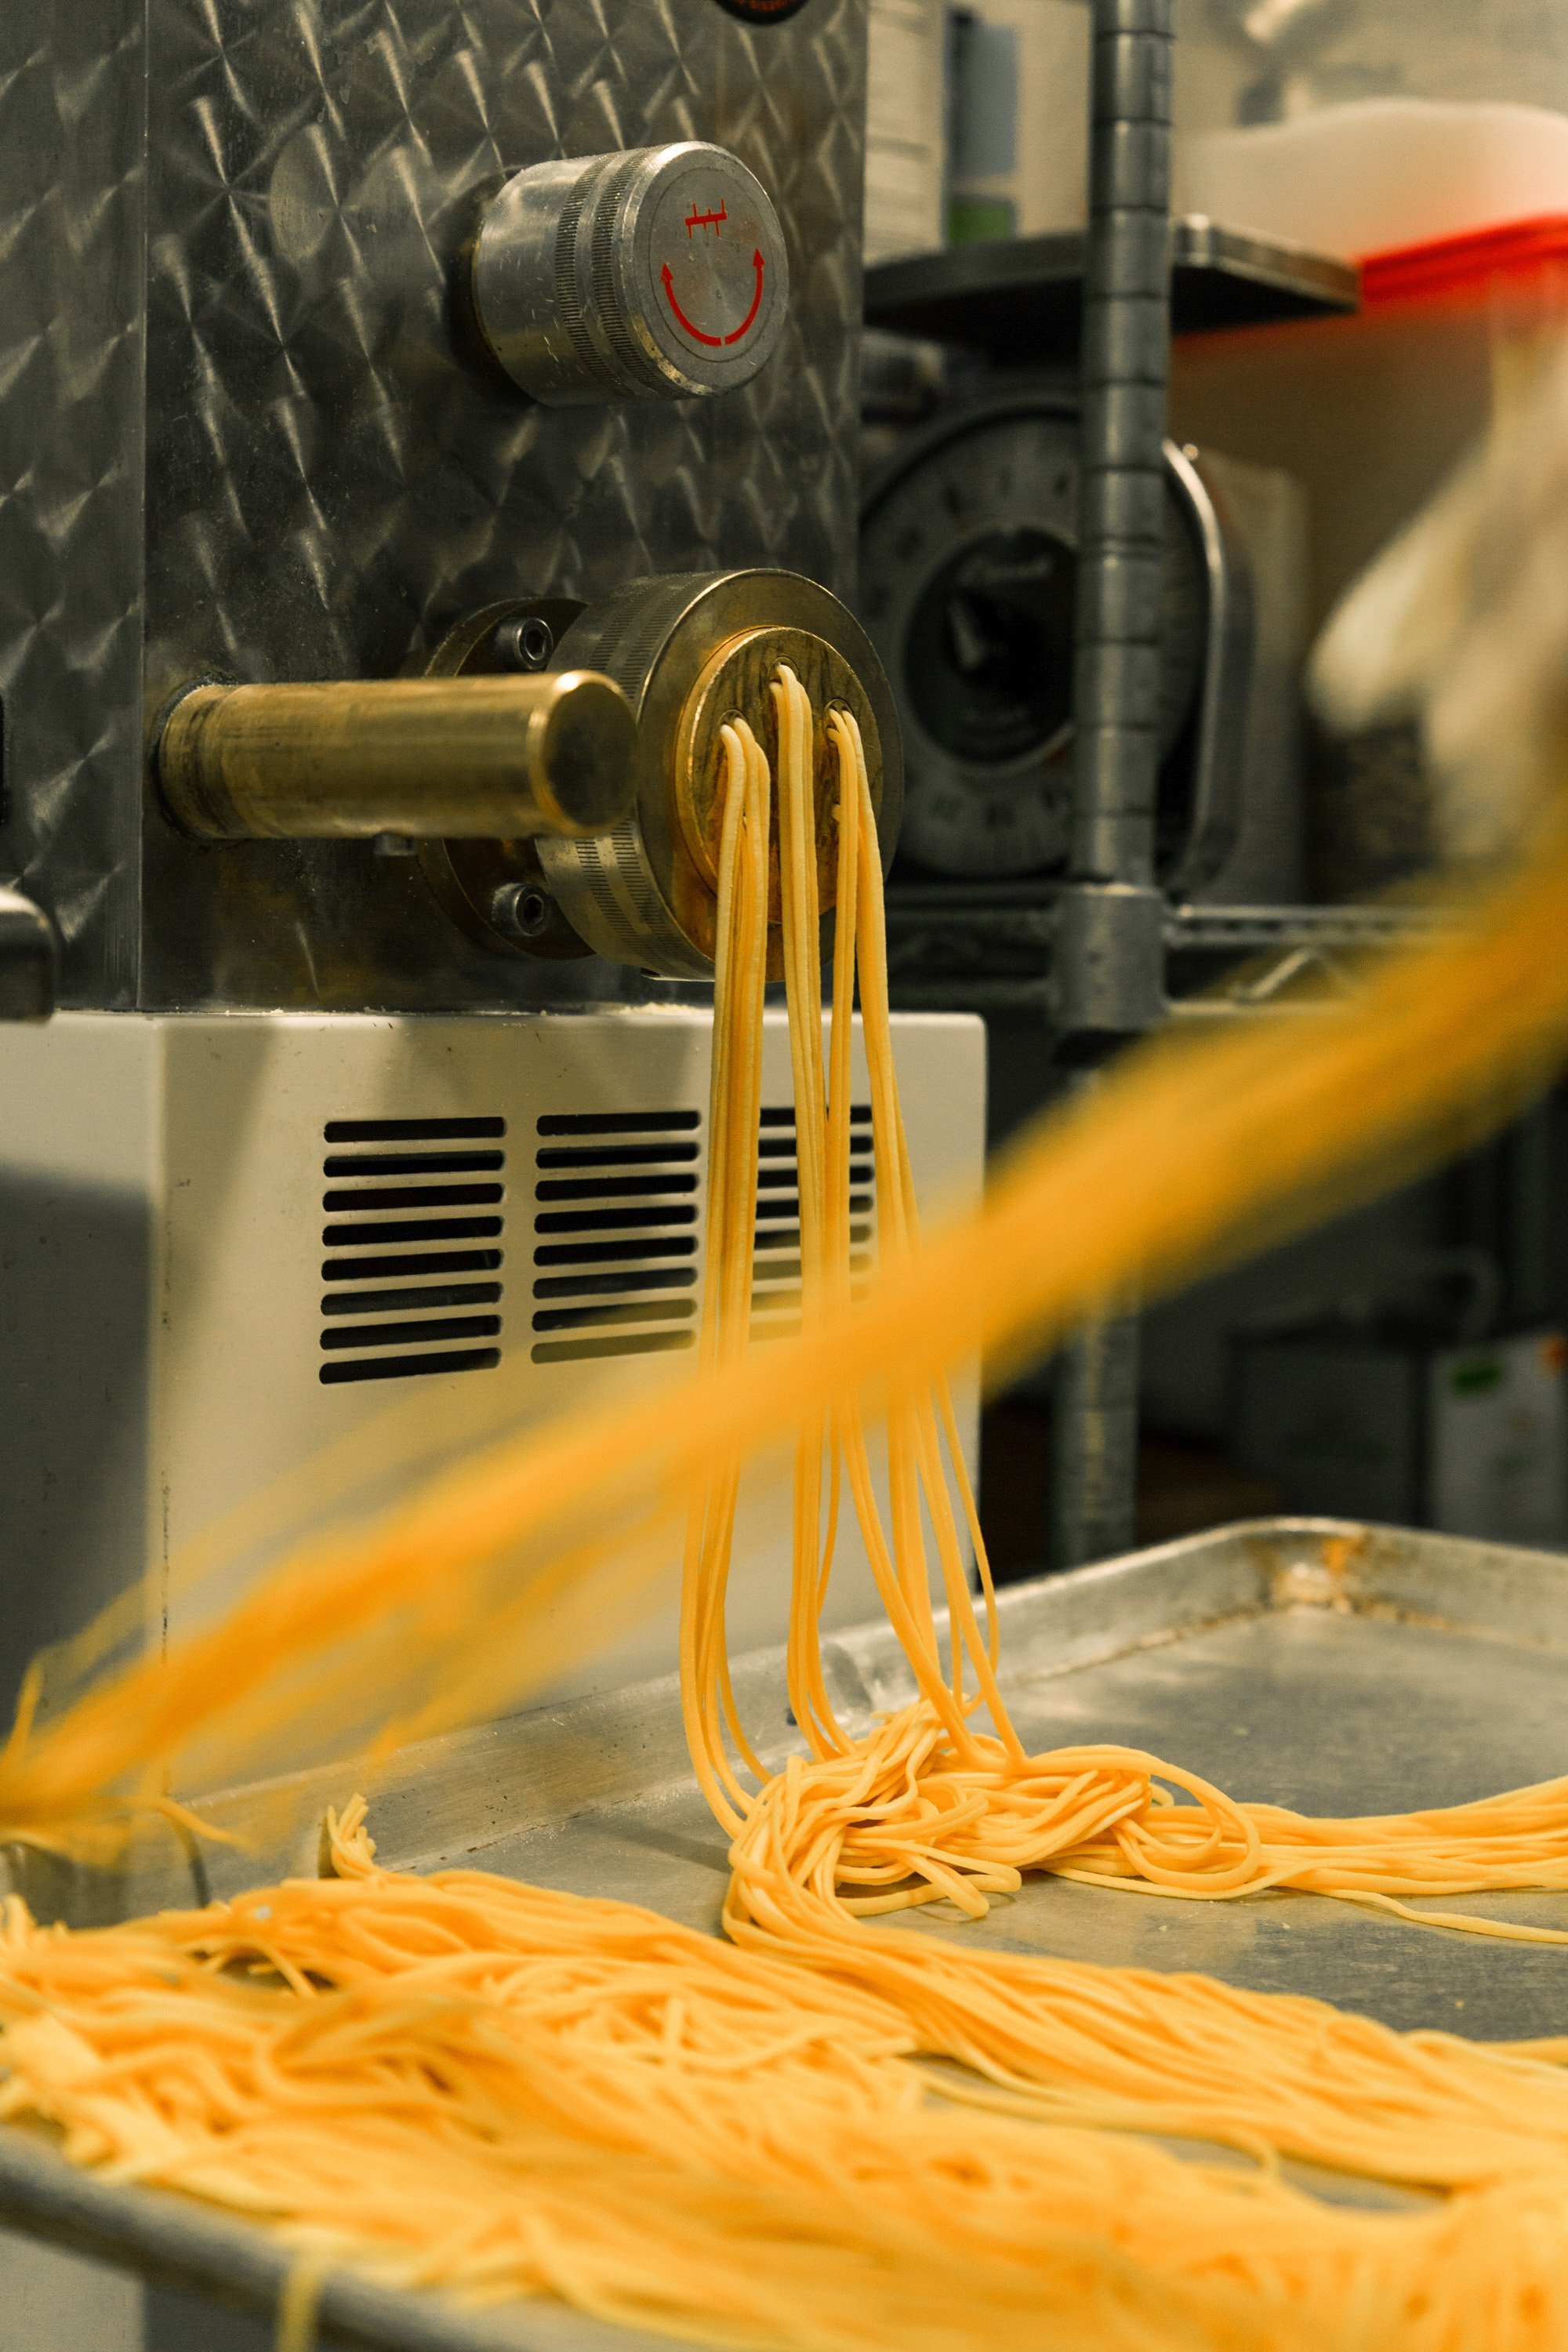 Exploring the Fascinating World of Italian Long Pasta Types - A  Comprehensive Guide – Magnifico Food